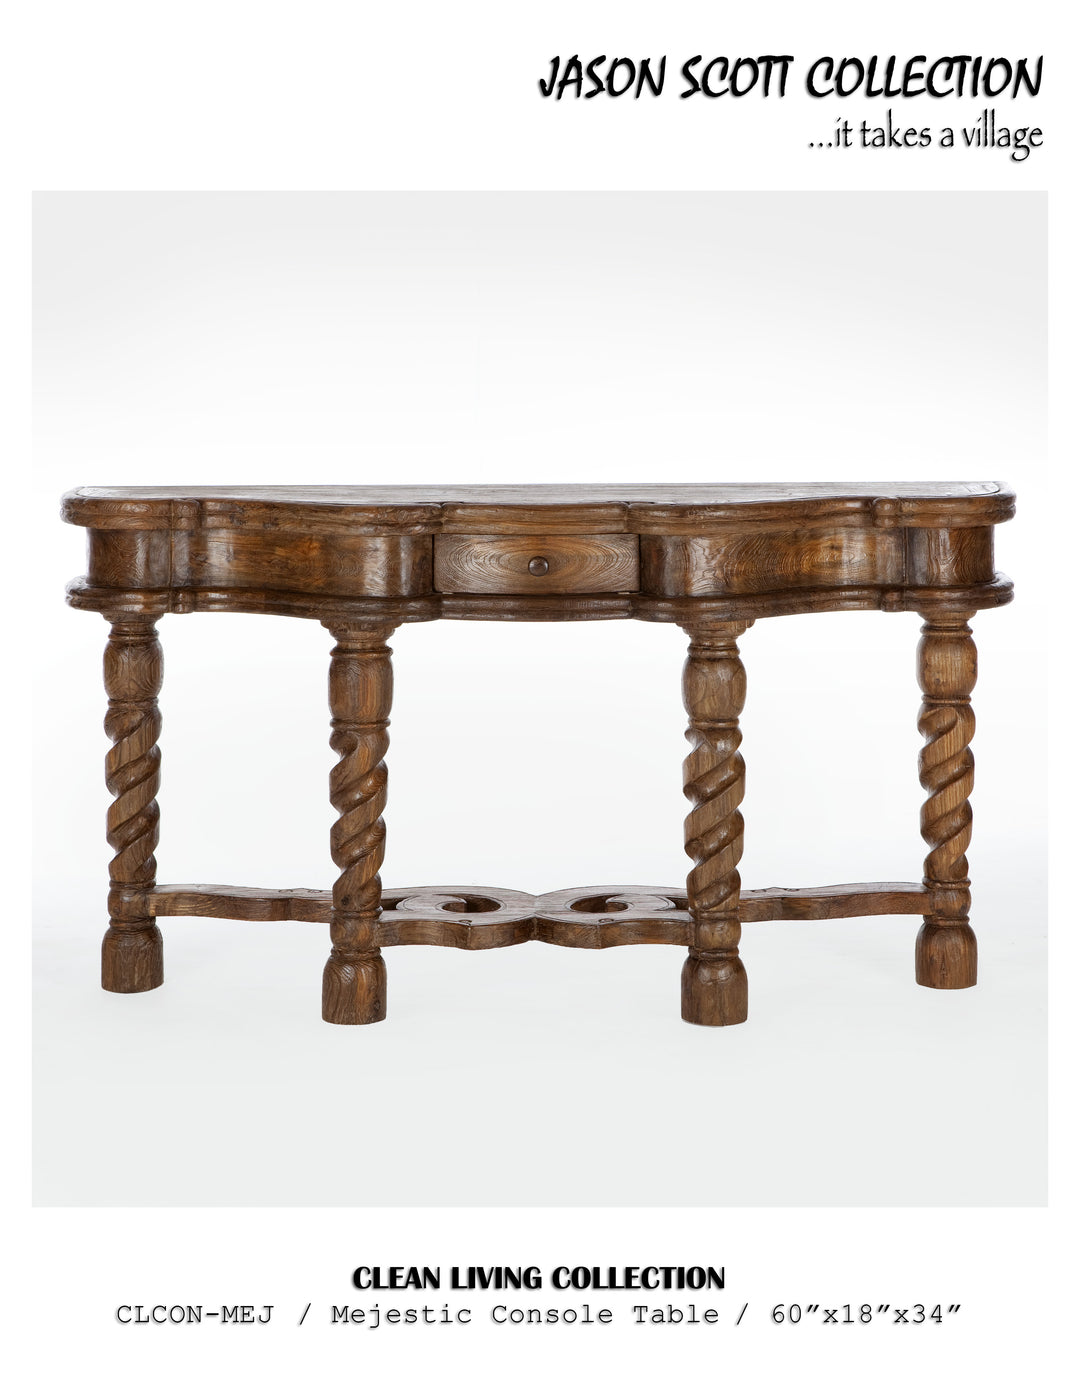 Mejestic Console Table